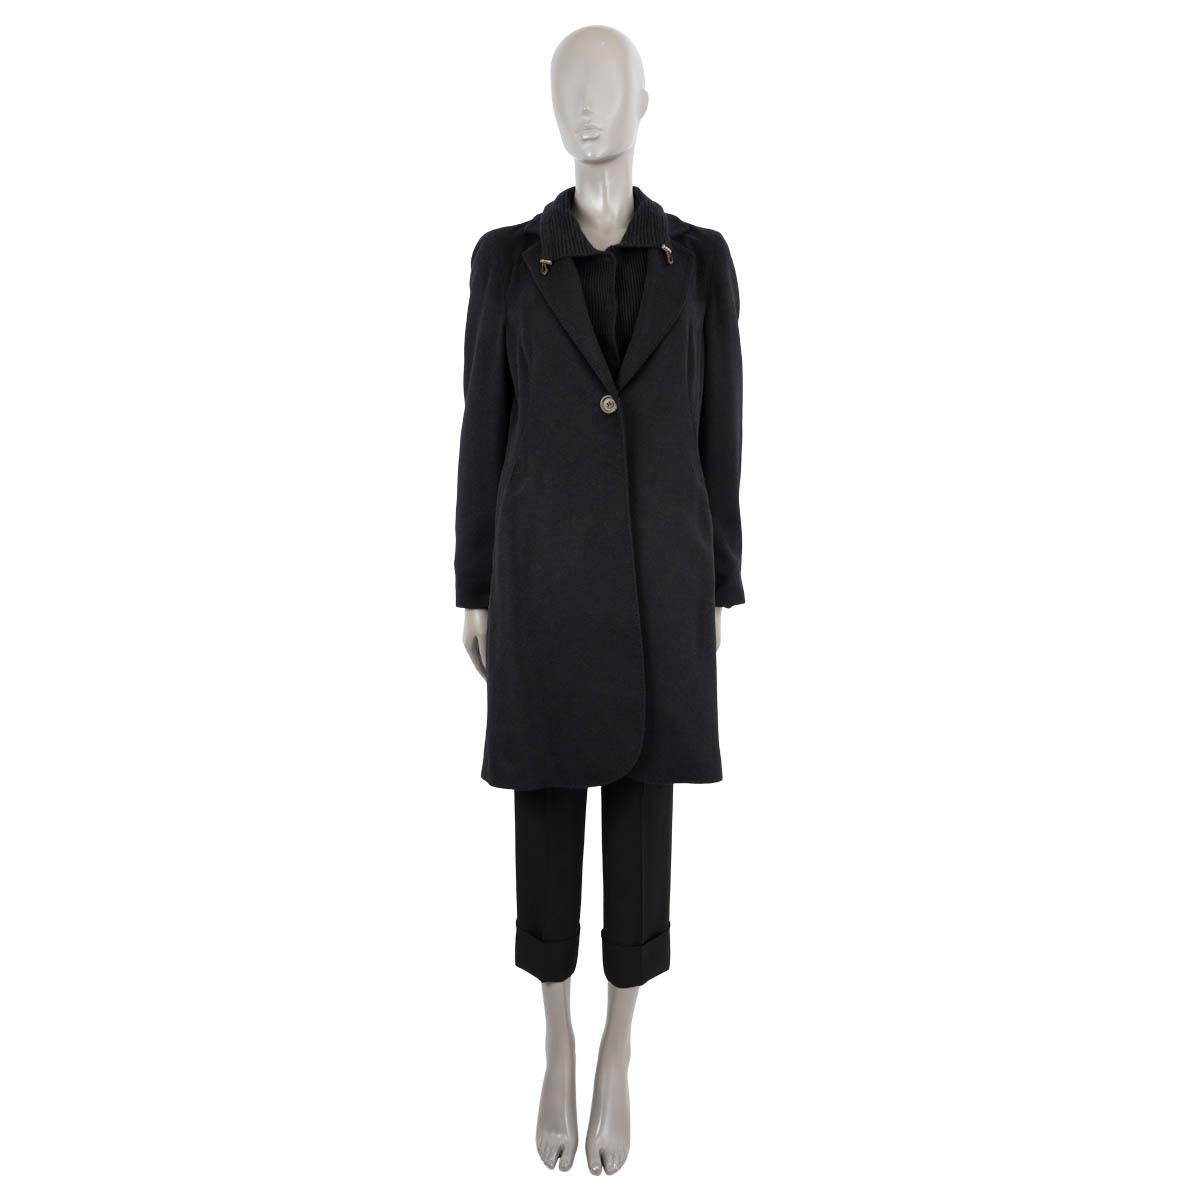 100% authentic Brunello Cucinelli slightly flared one-button coat in black cashmere (100%). The design features a buttoned inside soft rib-knit layer and collar with drawstring. Two slit side-pockets and a slit on the back. Unlined. The sleeves are